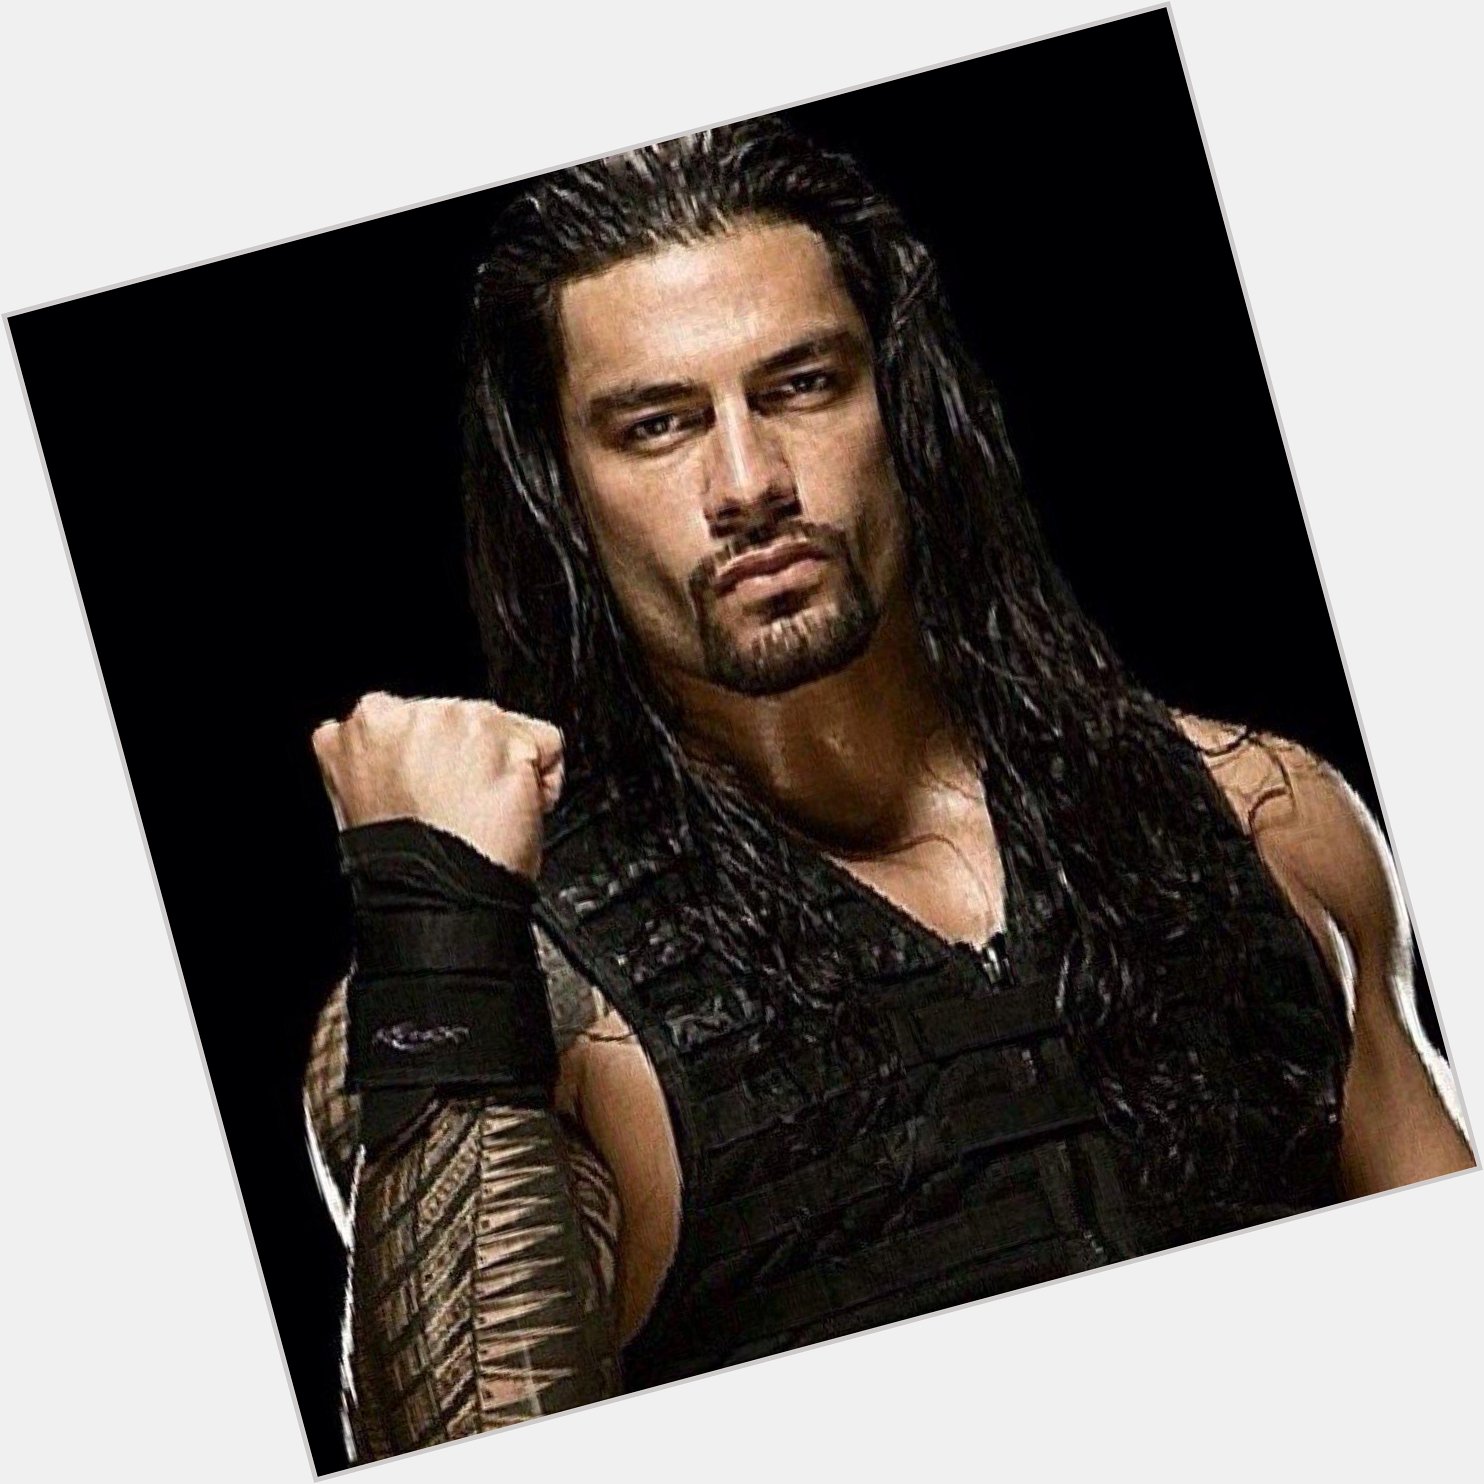 A Very Happy Birthday Goes To Out To RT/FAV To Wish Roman Reigns A HBD! 